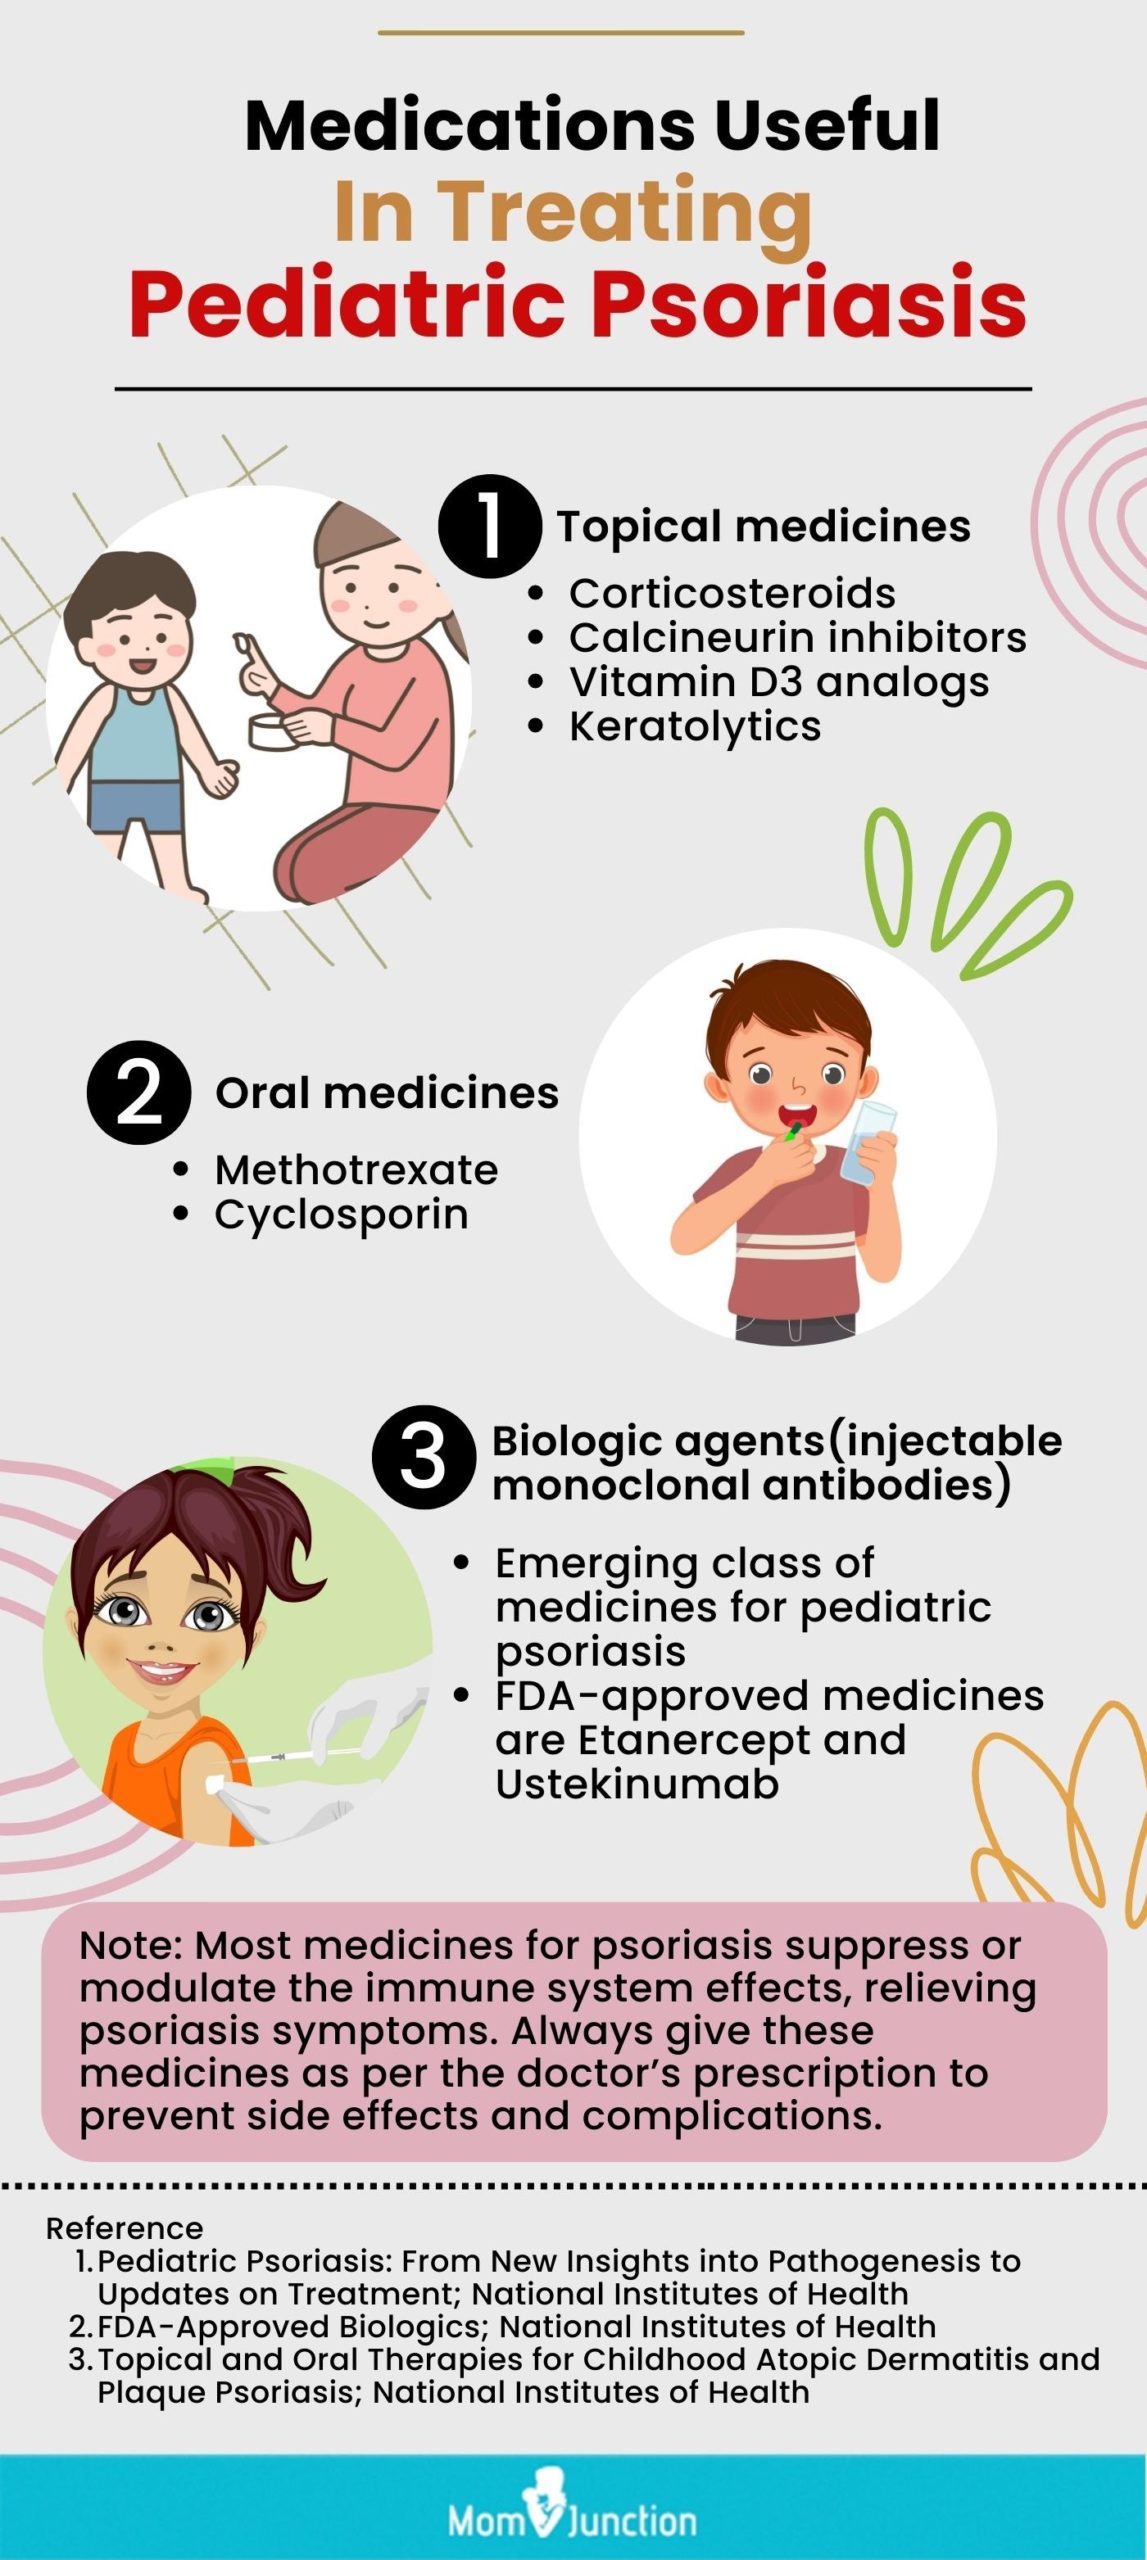 medications useful in treating pediatric psoriasis (infographic)